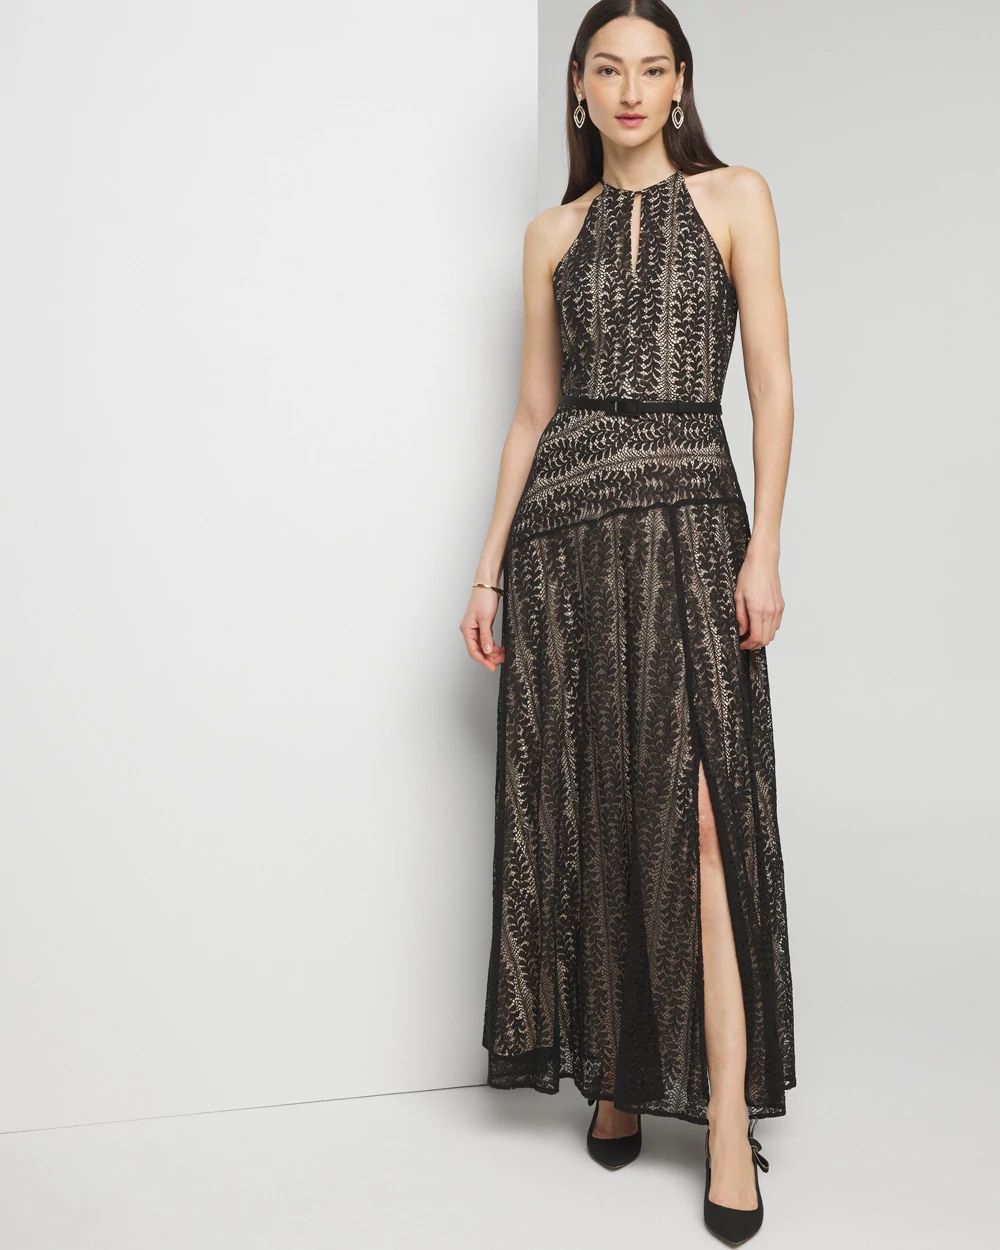 Petite Sleeveless Halter Lace Maxi Dress click to view larger image.